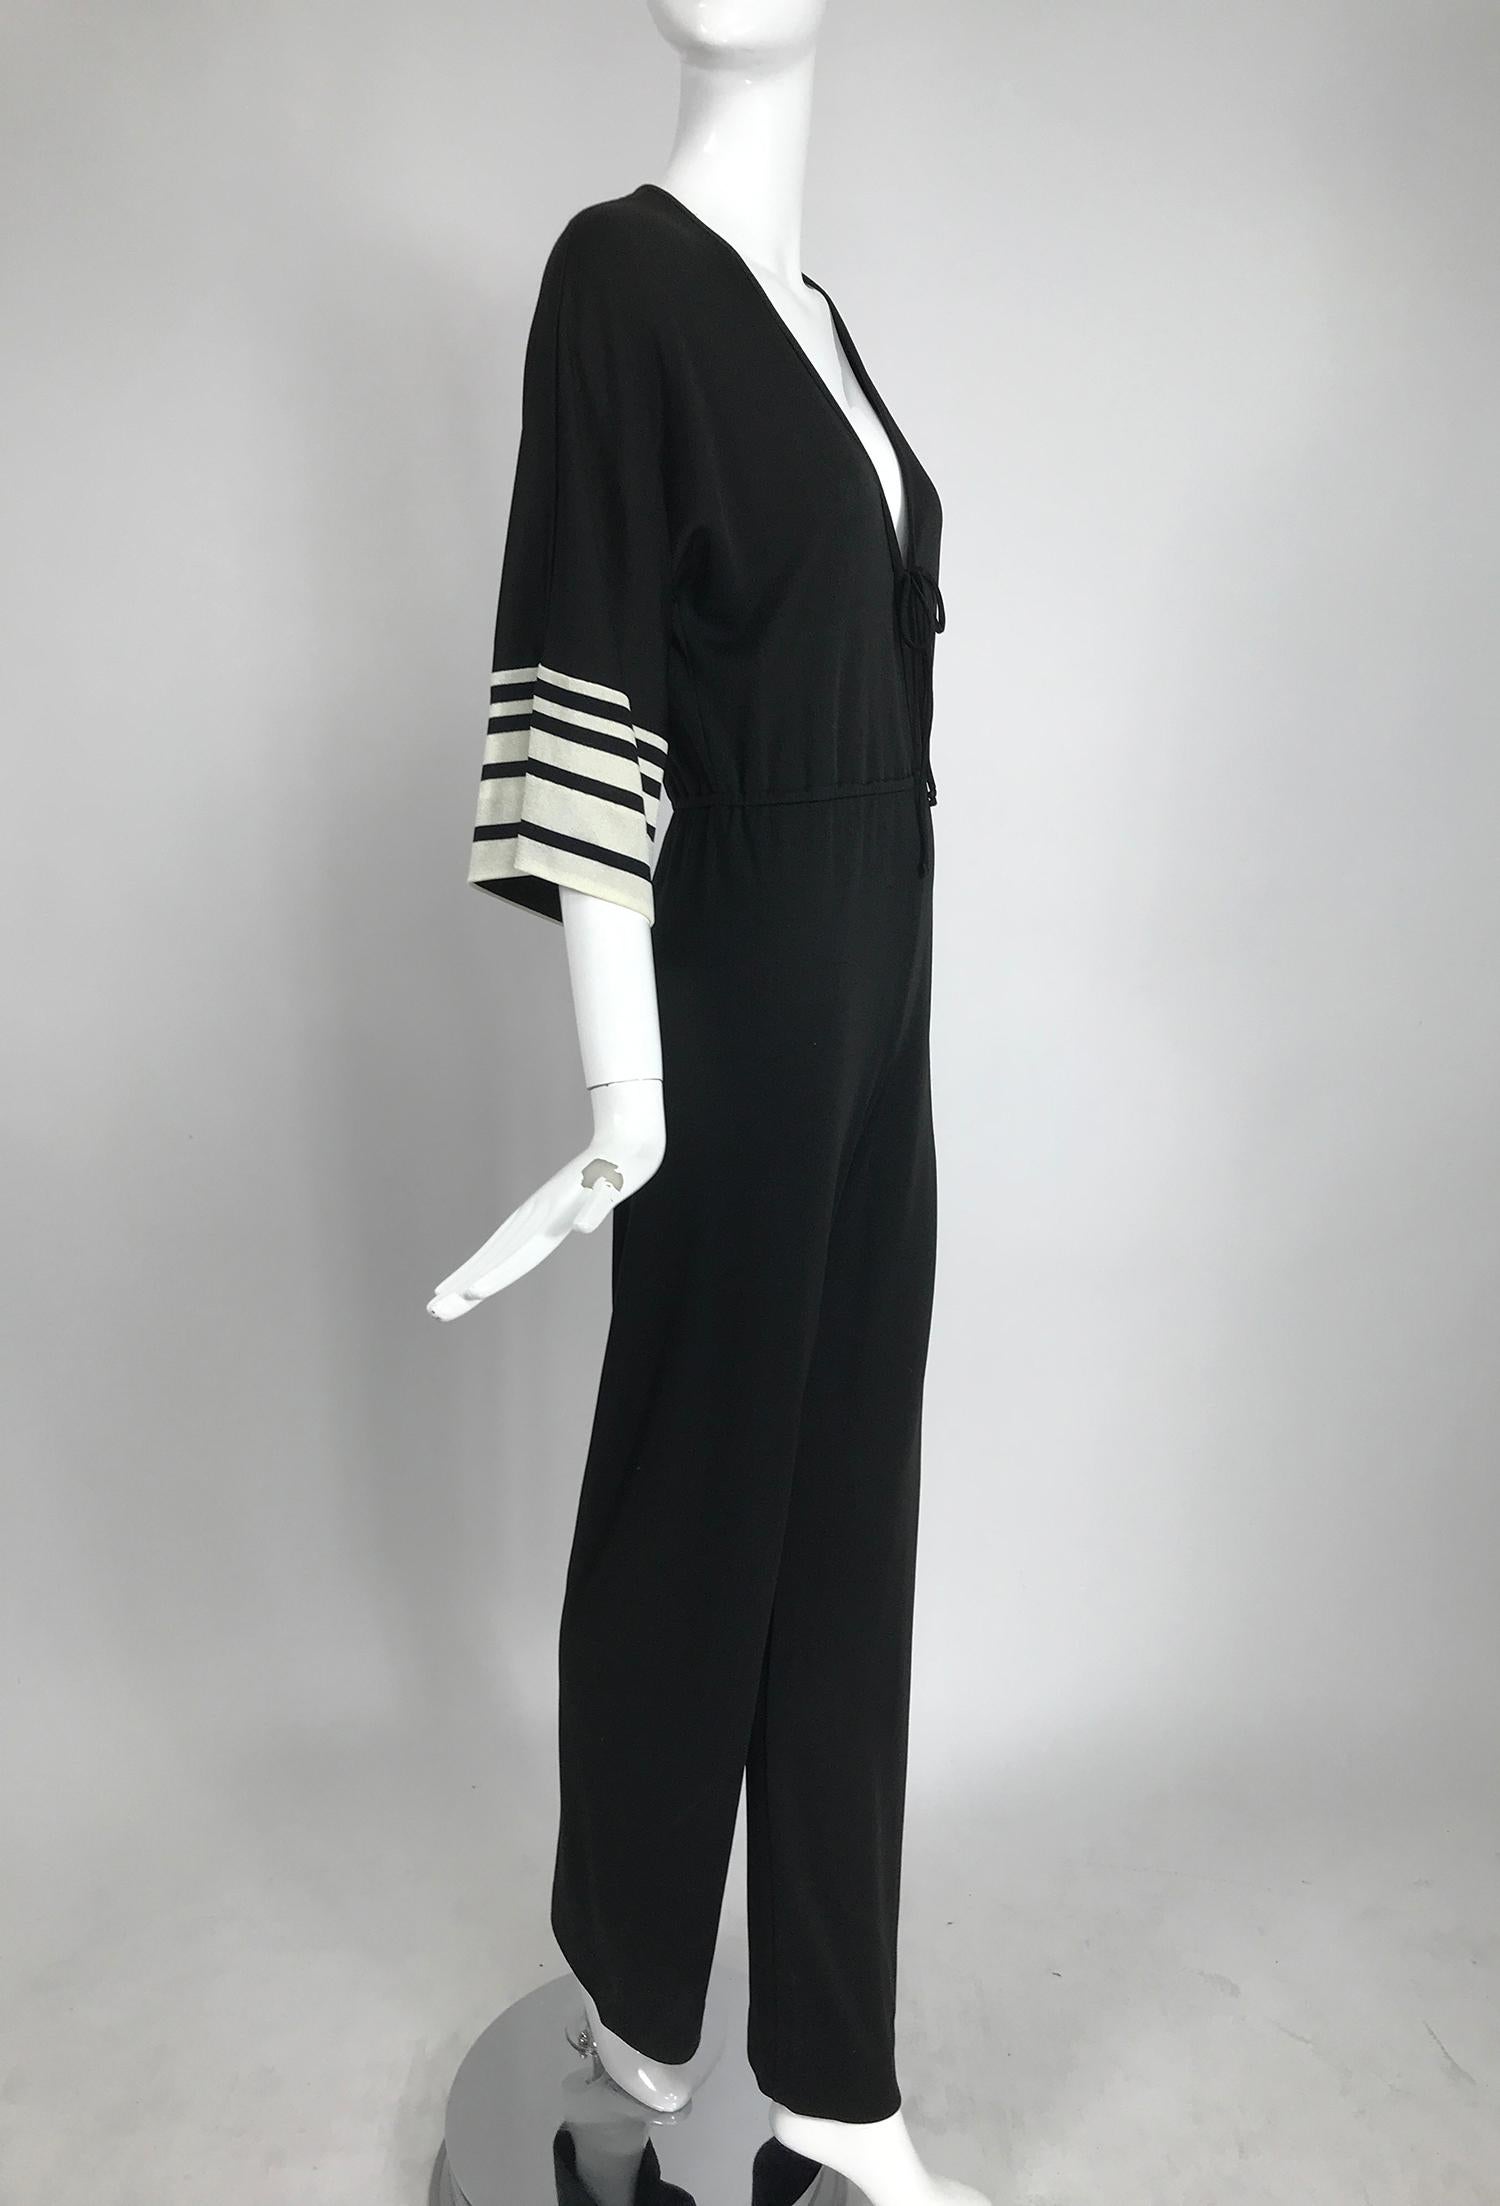 Vintage Clovis Ruffin Ruffinwear, black and white jersey jumpsuit from the 1970s. Sleek black jersey jumpsuit with a plunge neckline, ties at the front, cased elastic waist and long full legs. The sleeves are full and elbow length with narrow and